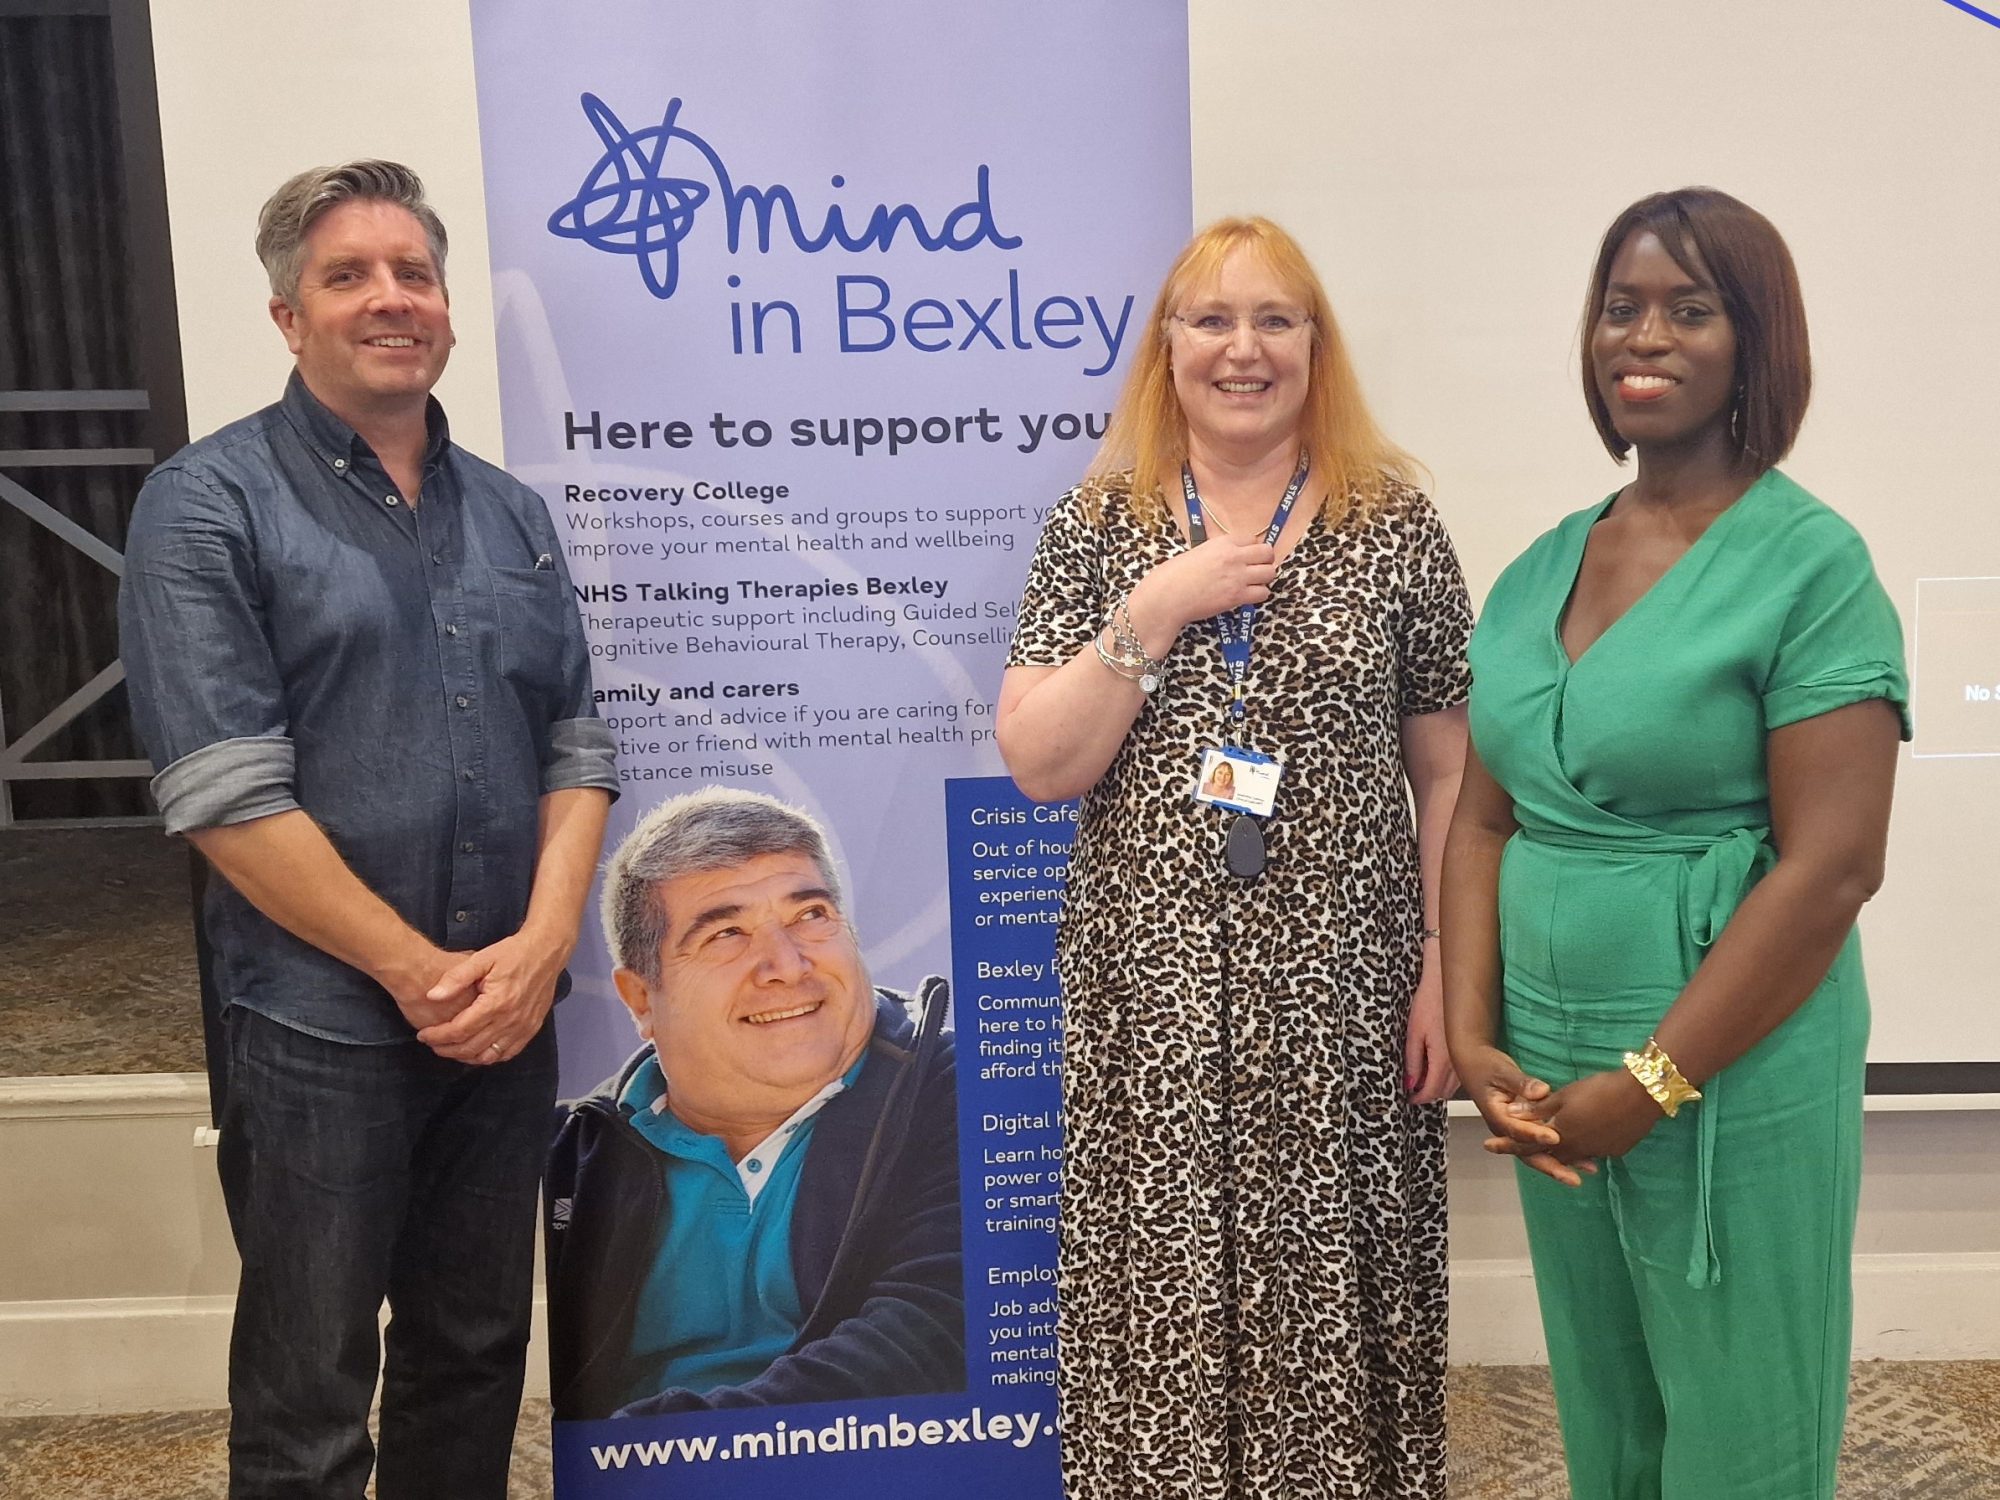 A photograph from the APL PCN Menopause Awareness Event, featuring Mind in Bexley's Dr David Palmer and Edelweiss Collings, as well as Dr Emma Ageykum